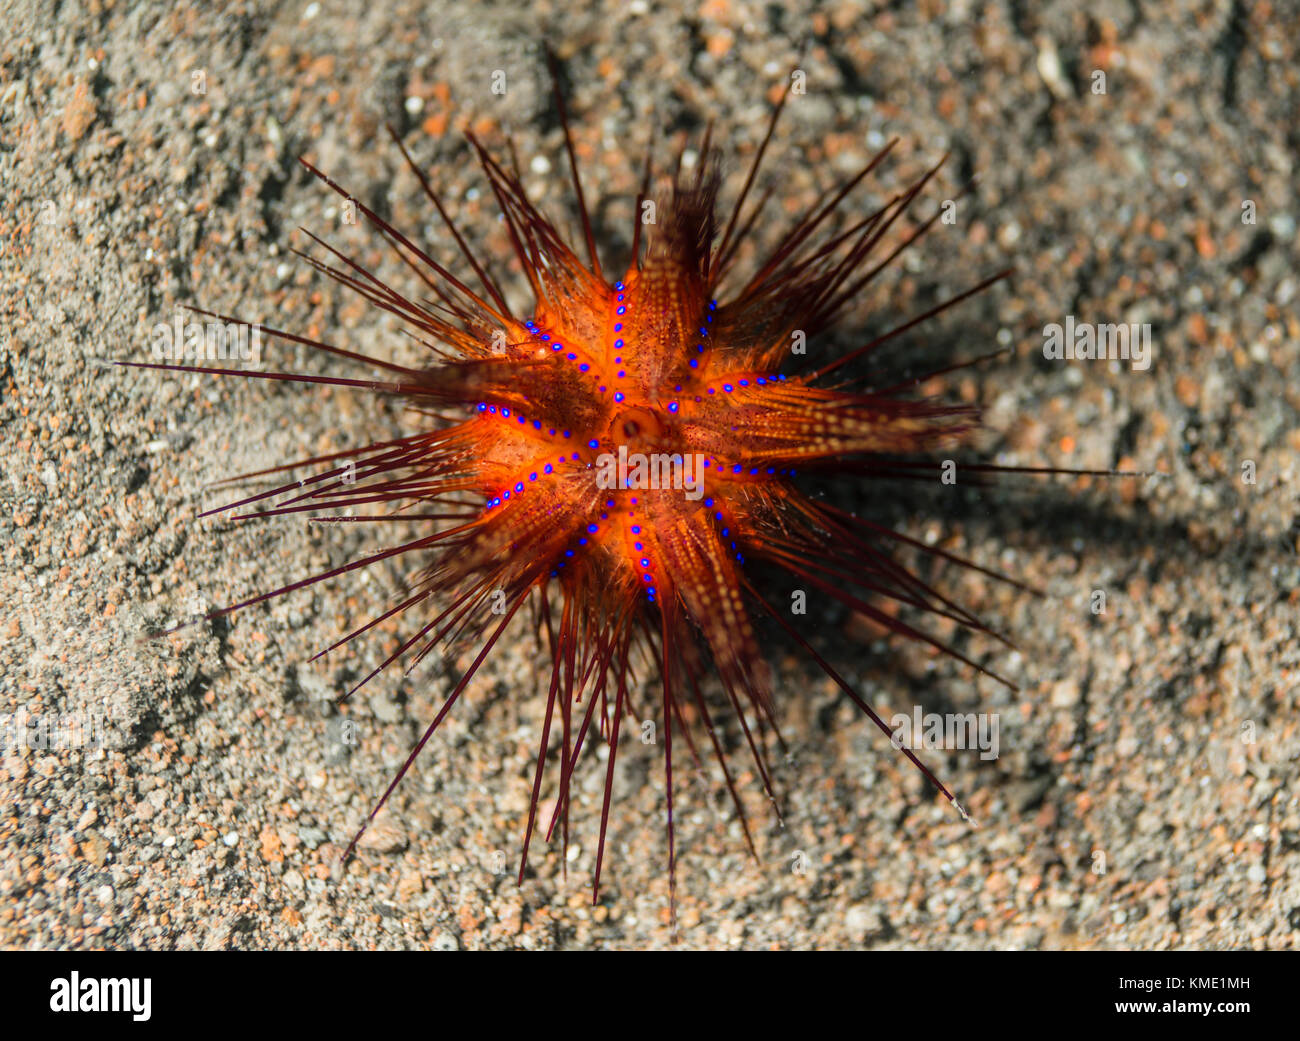 Blue-spotted sea urchin displaying its colors on the ocean floor Stock Photo